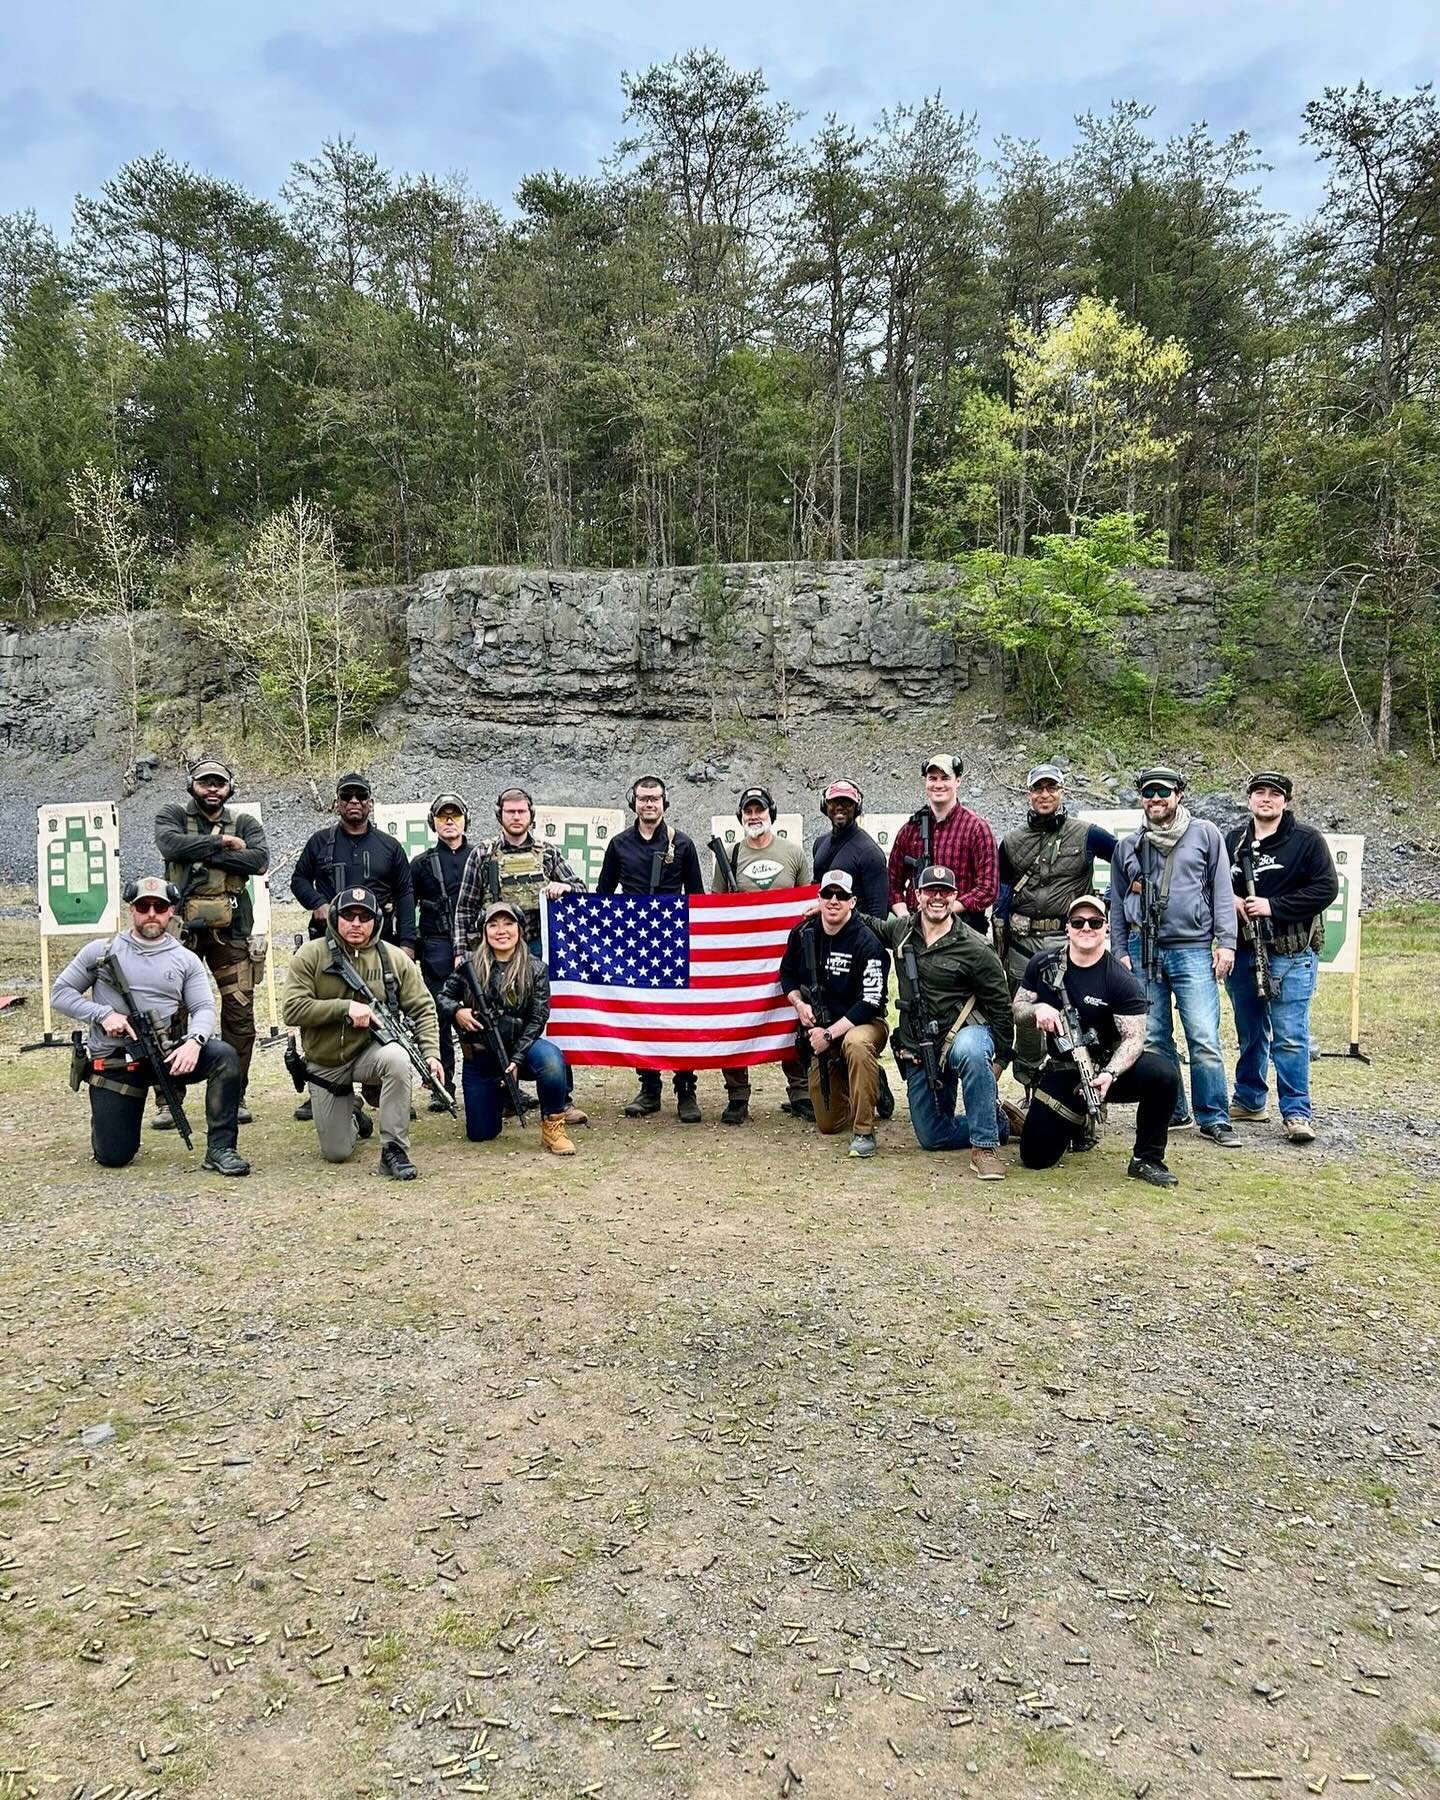 Graduates of the GreenOps Tactical Pistol Carbine in📍Culpeper, VA 👏🏻👏🏻👏🏻👏🏻. A sold out class came out and put in some work. 🇺🇸 

Thank you to everyone who attended this class and huge thank you to GreenOps instructor @chrisalvarez580 , and